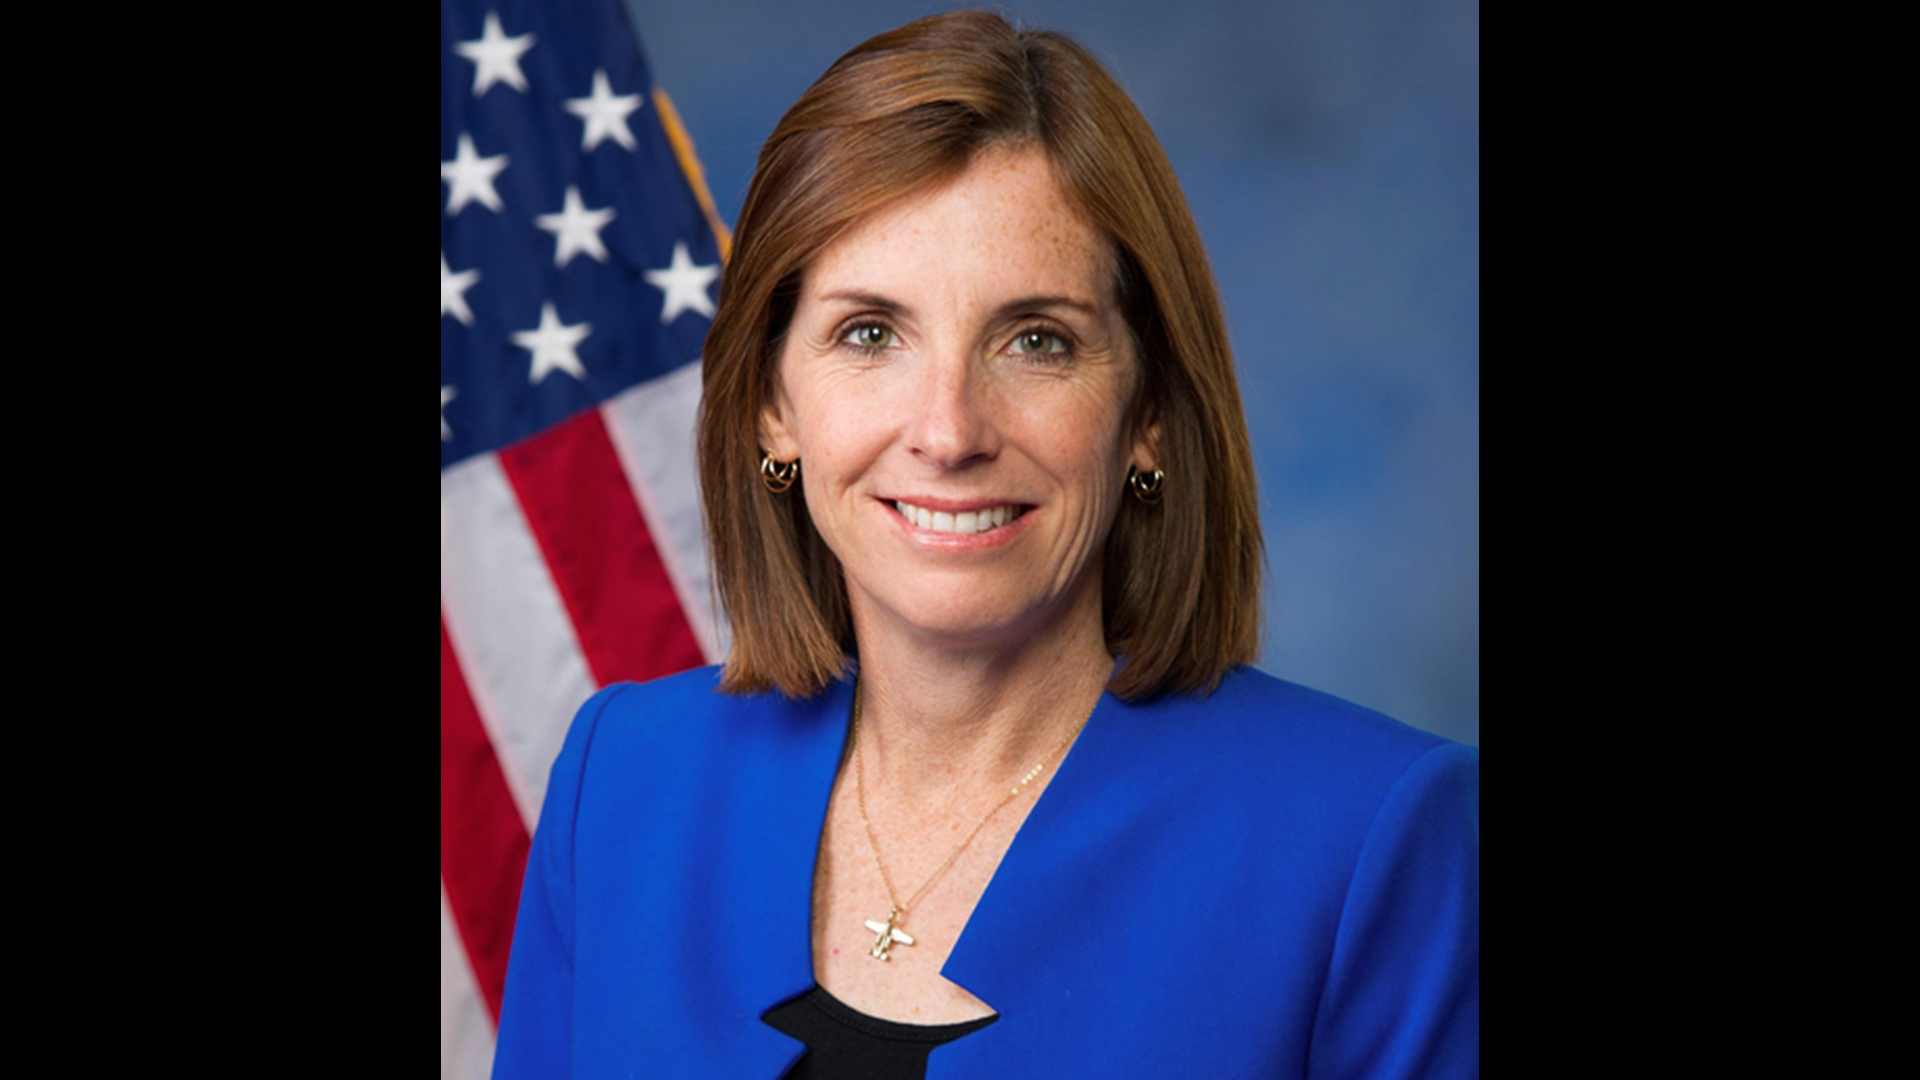 Governor Doug Ducey announced today that Martha McSally will fill John McCain's seat in the US Senate. The appointment drew praise from some Republicans like Senator Jon Kyl. McSally said she is looking forward to working with Senator-elect Kyrsten Sinema, who she lost the election to in November.